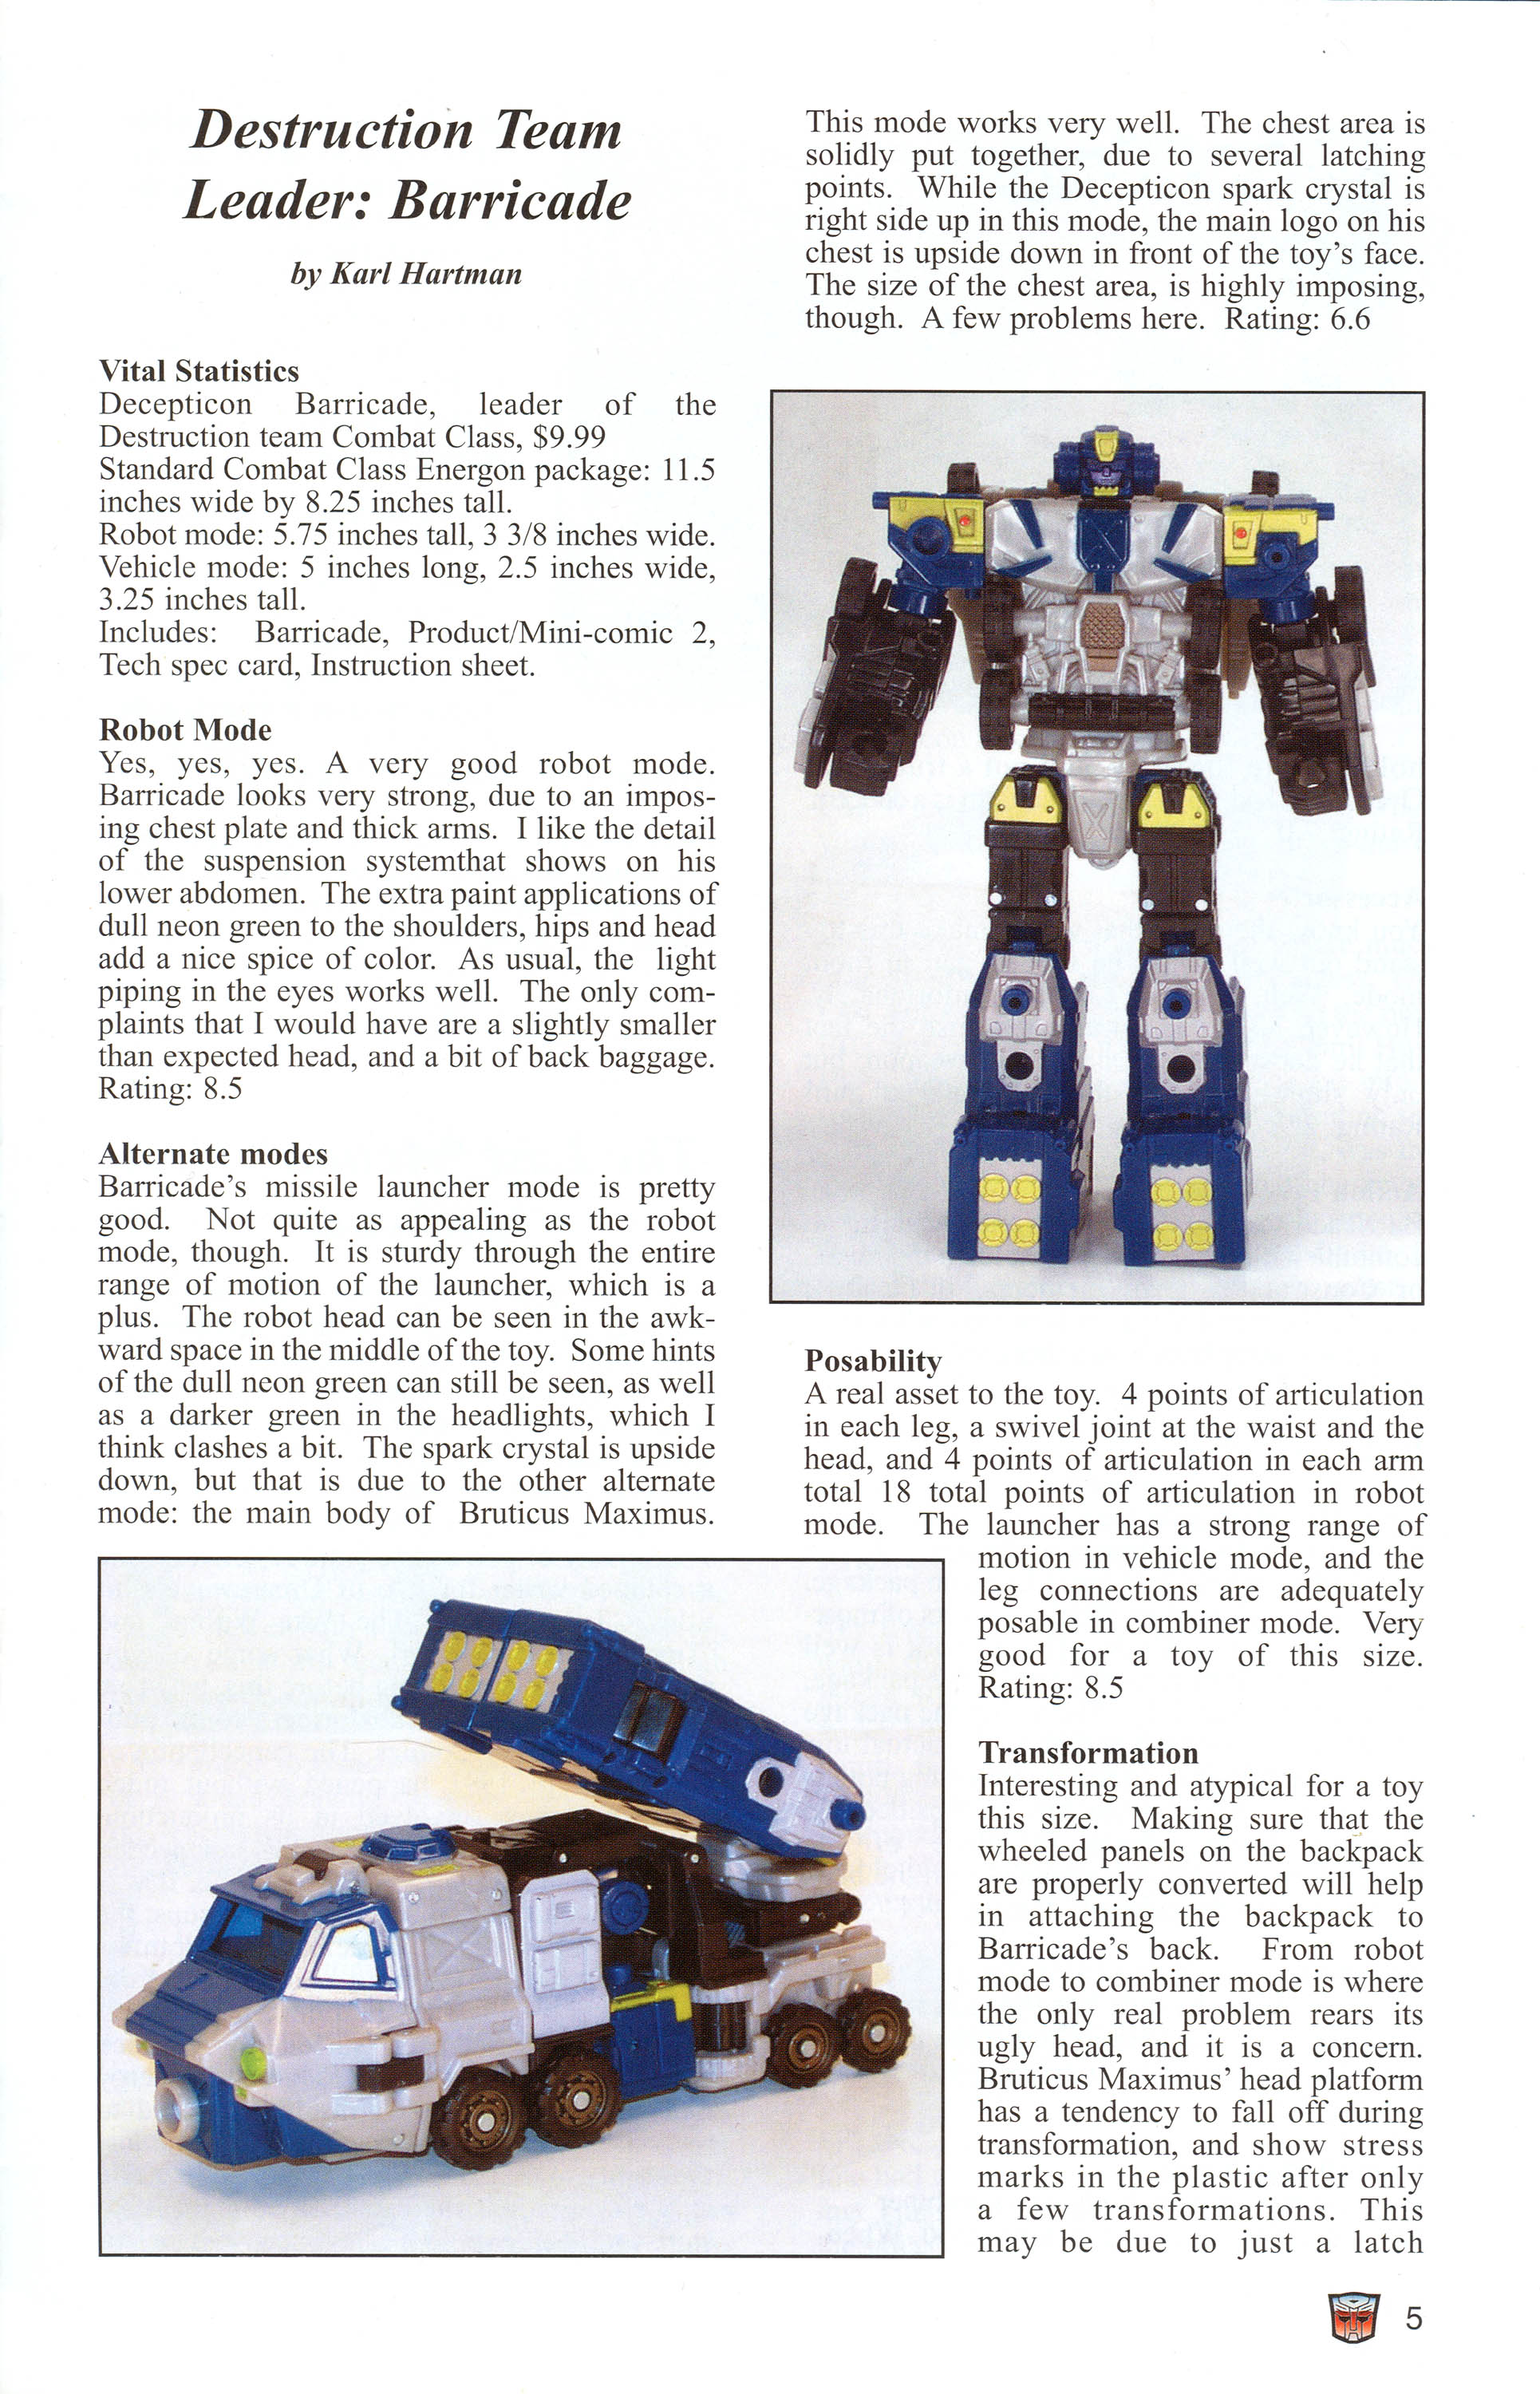 Read online Transformers: Collectors' Club comic -  Issue #1 - 5